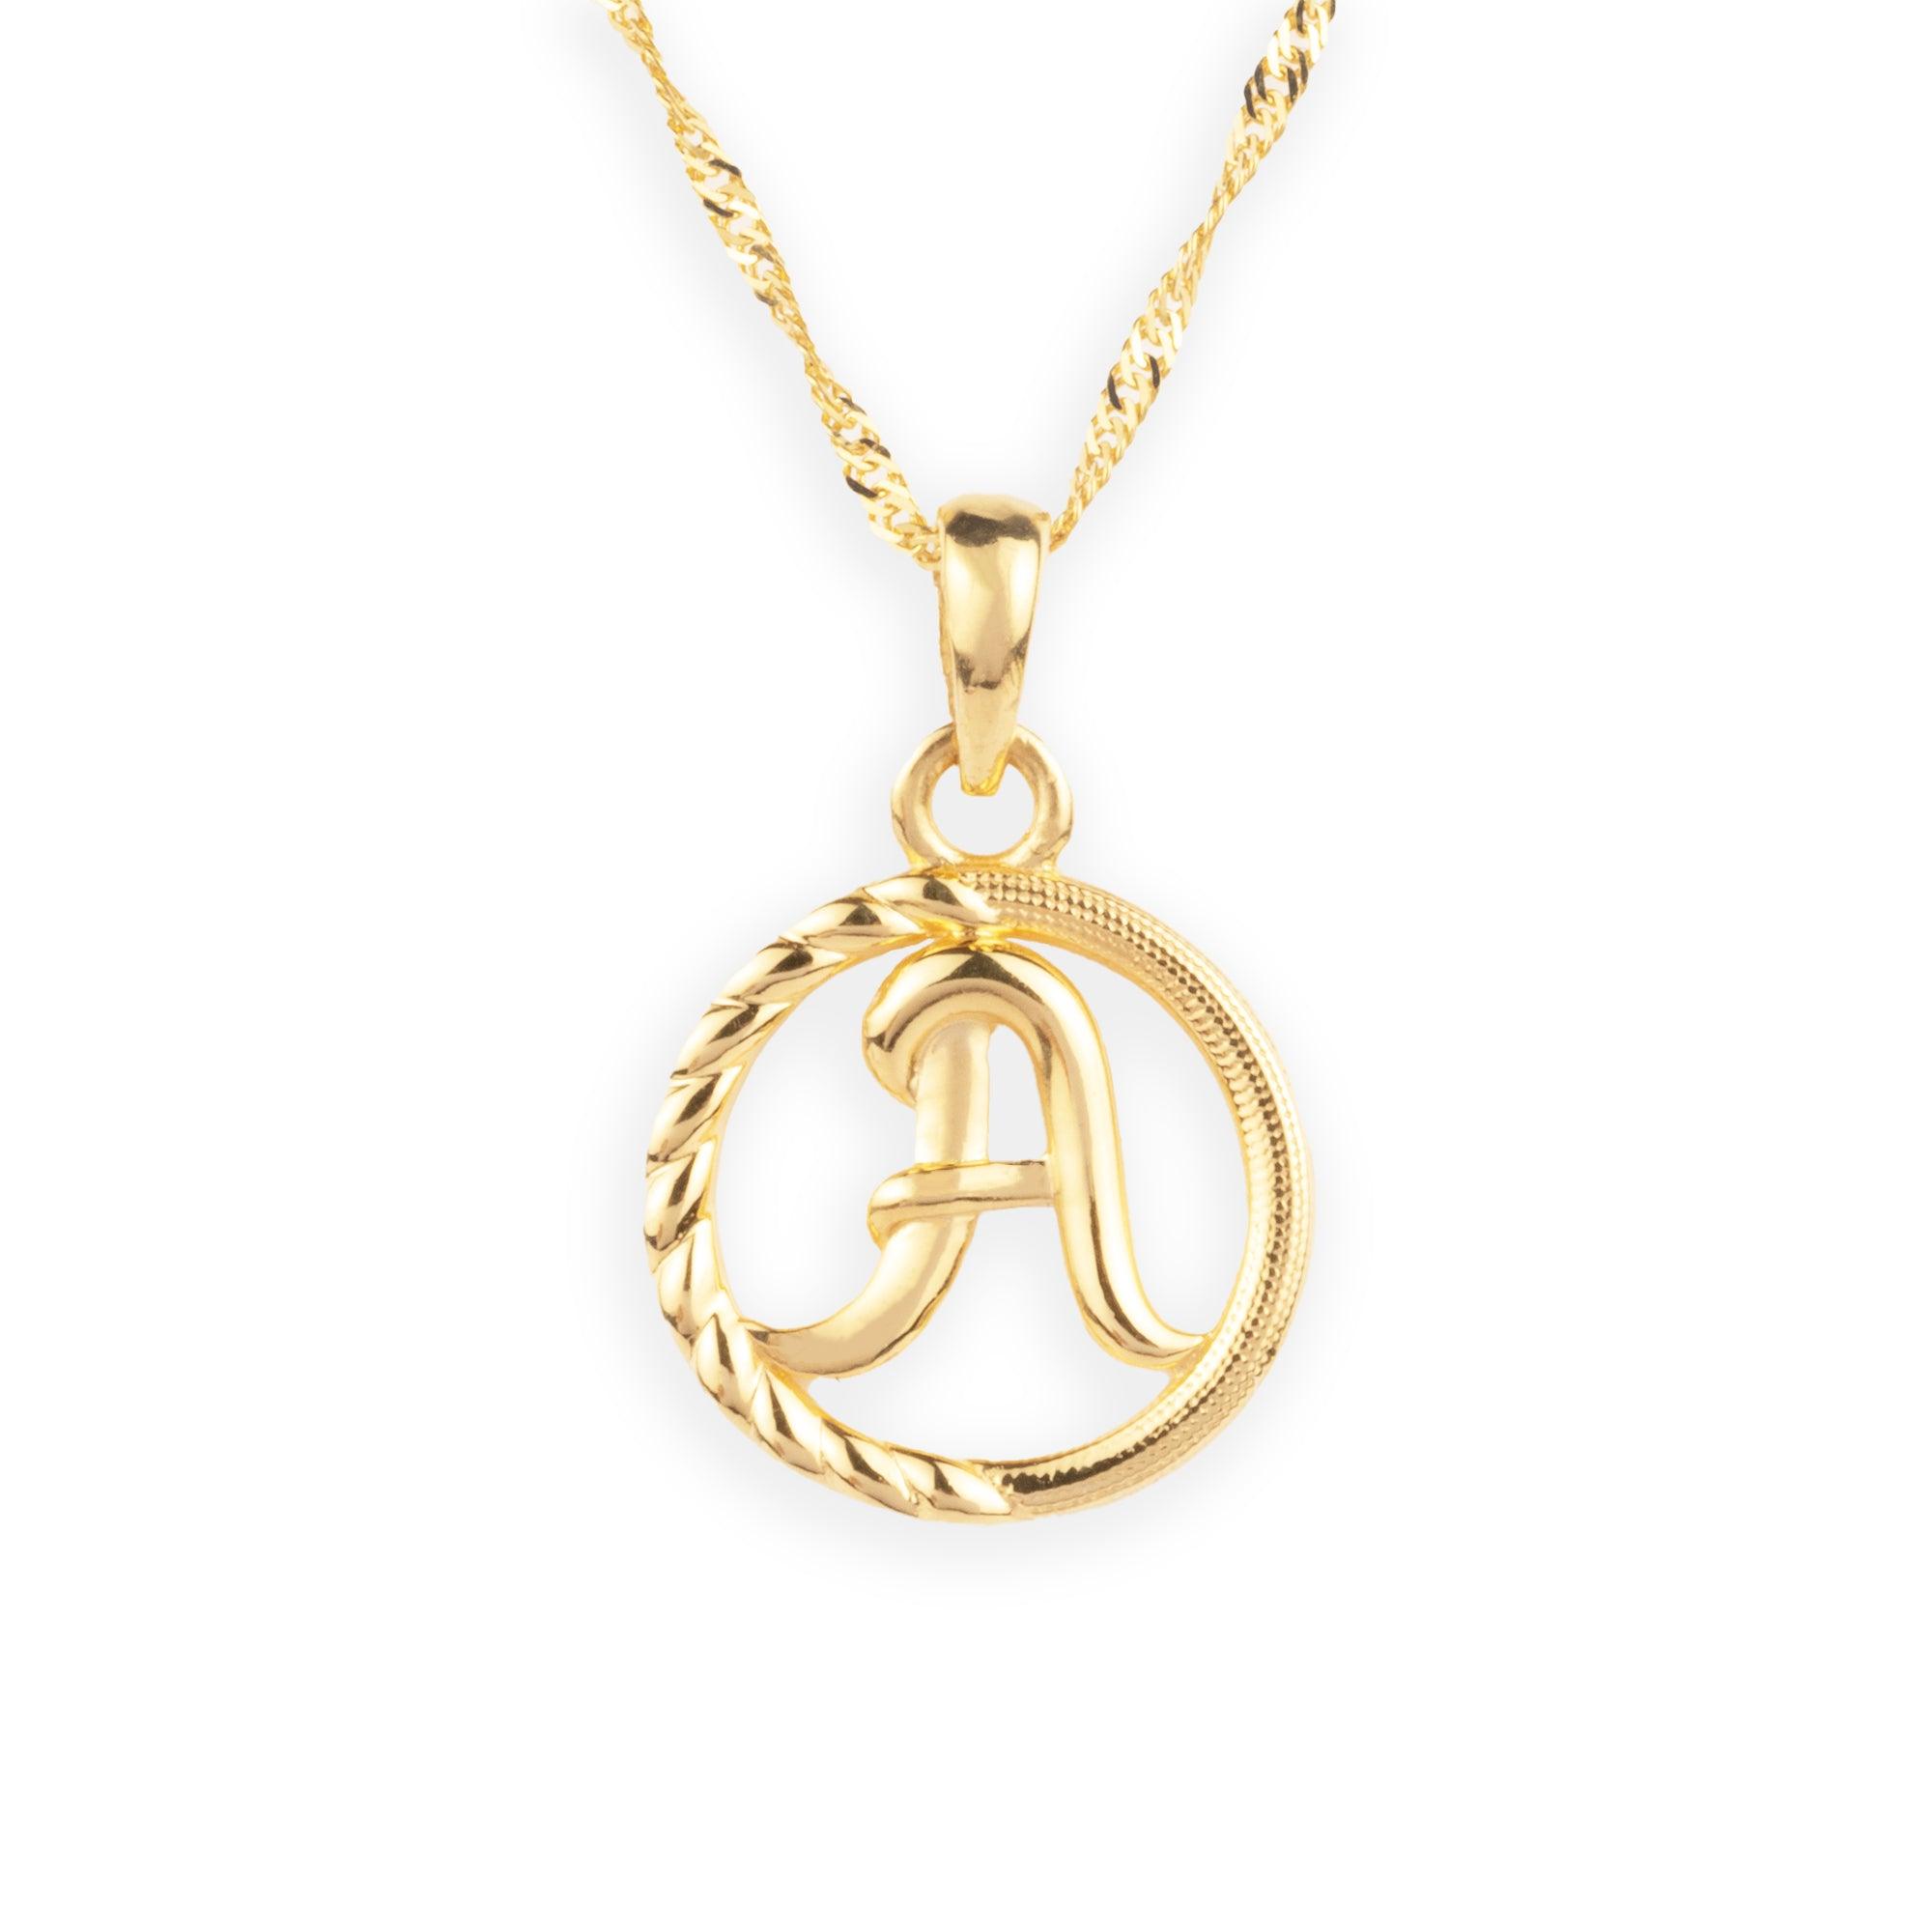 'A' 22ct Gold Circle Initial Pendant P-7034-A